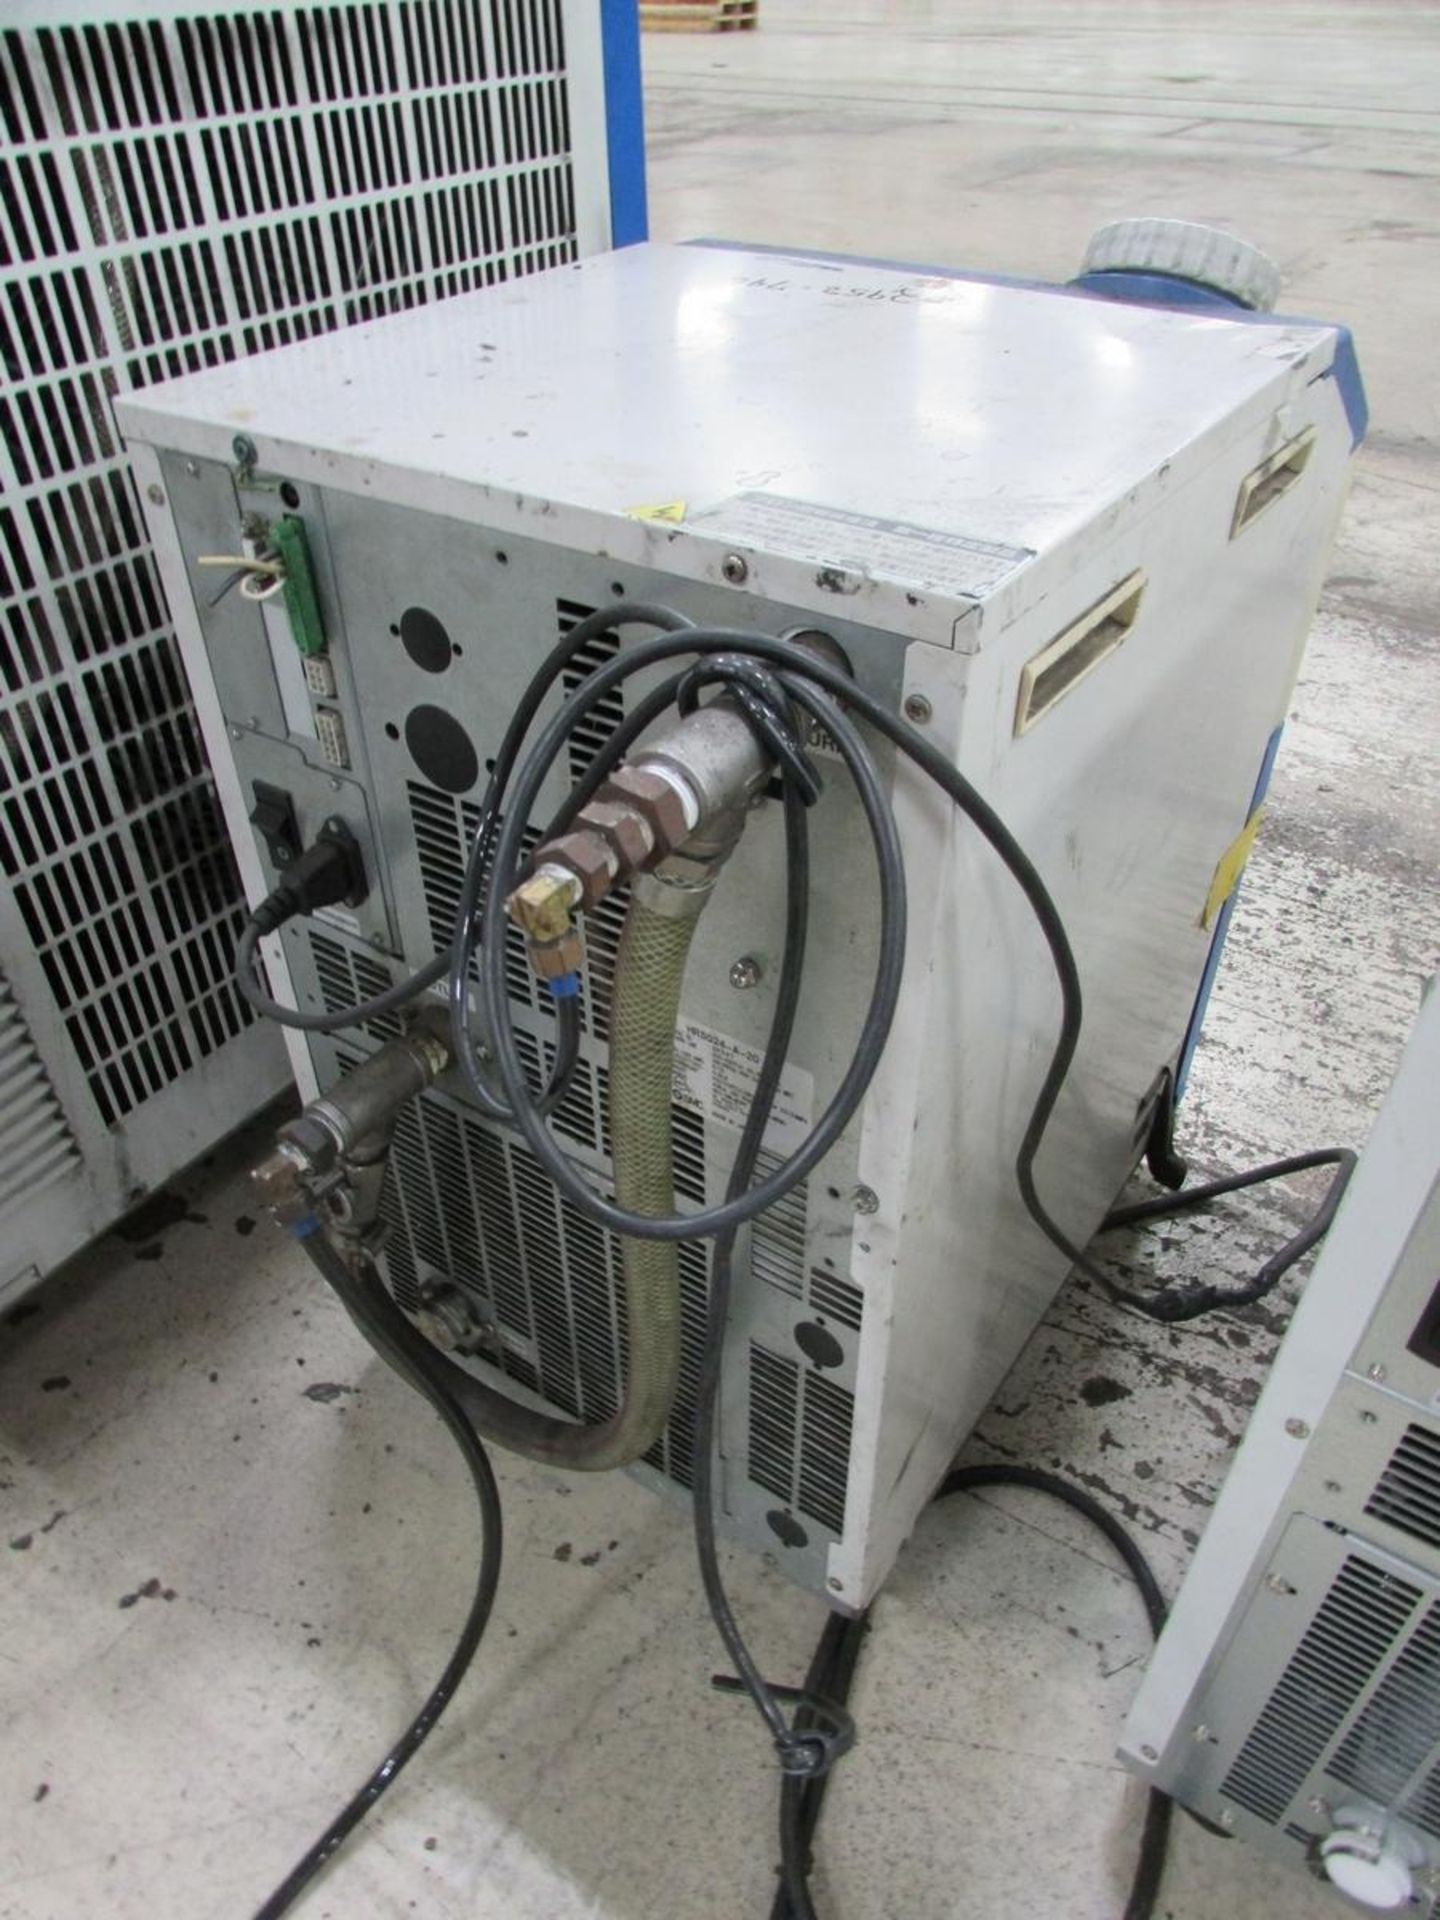 SMC HRS024-A-20 Thermo Chiller - Image 5 of 6